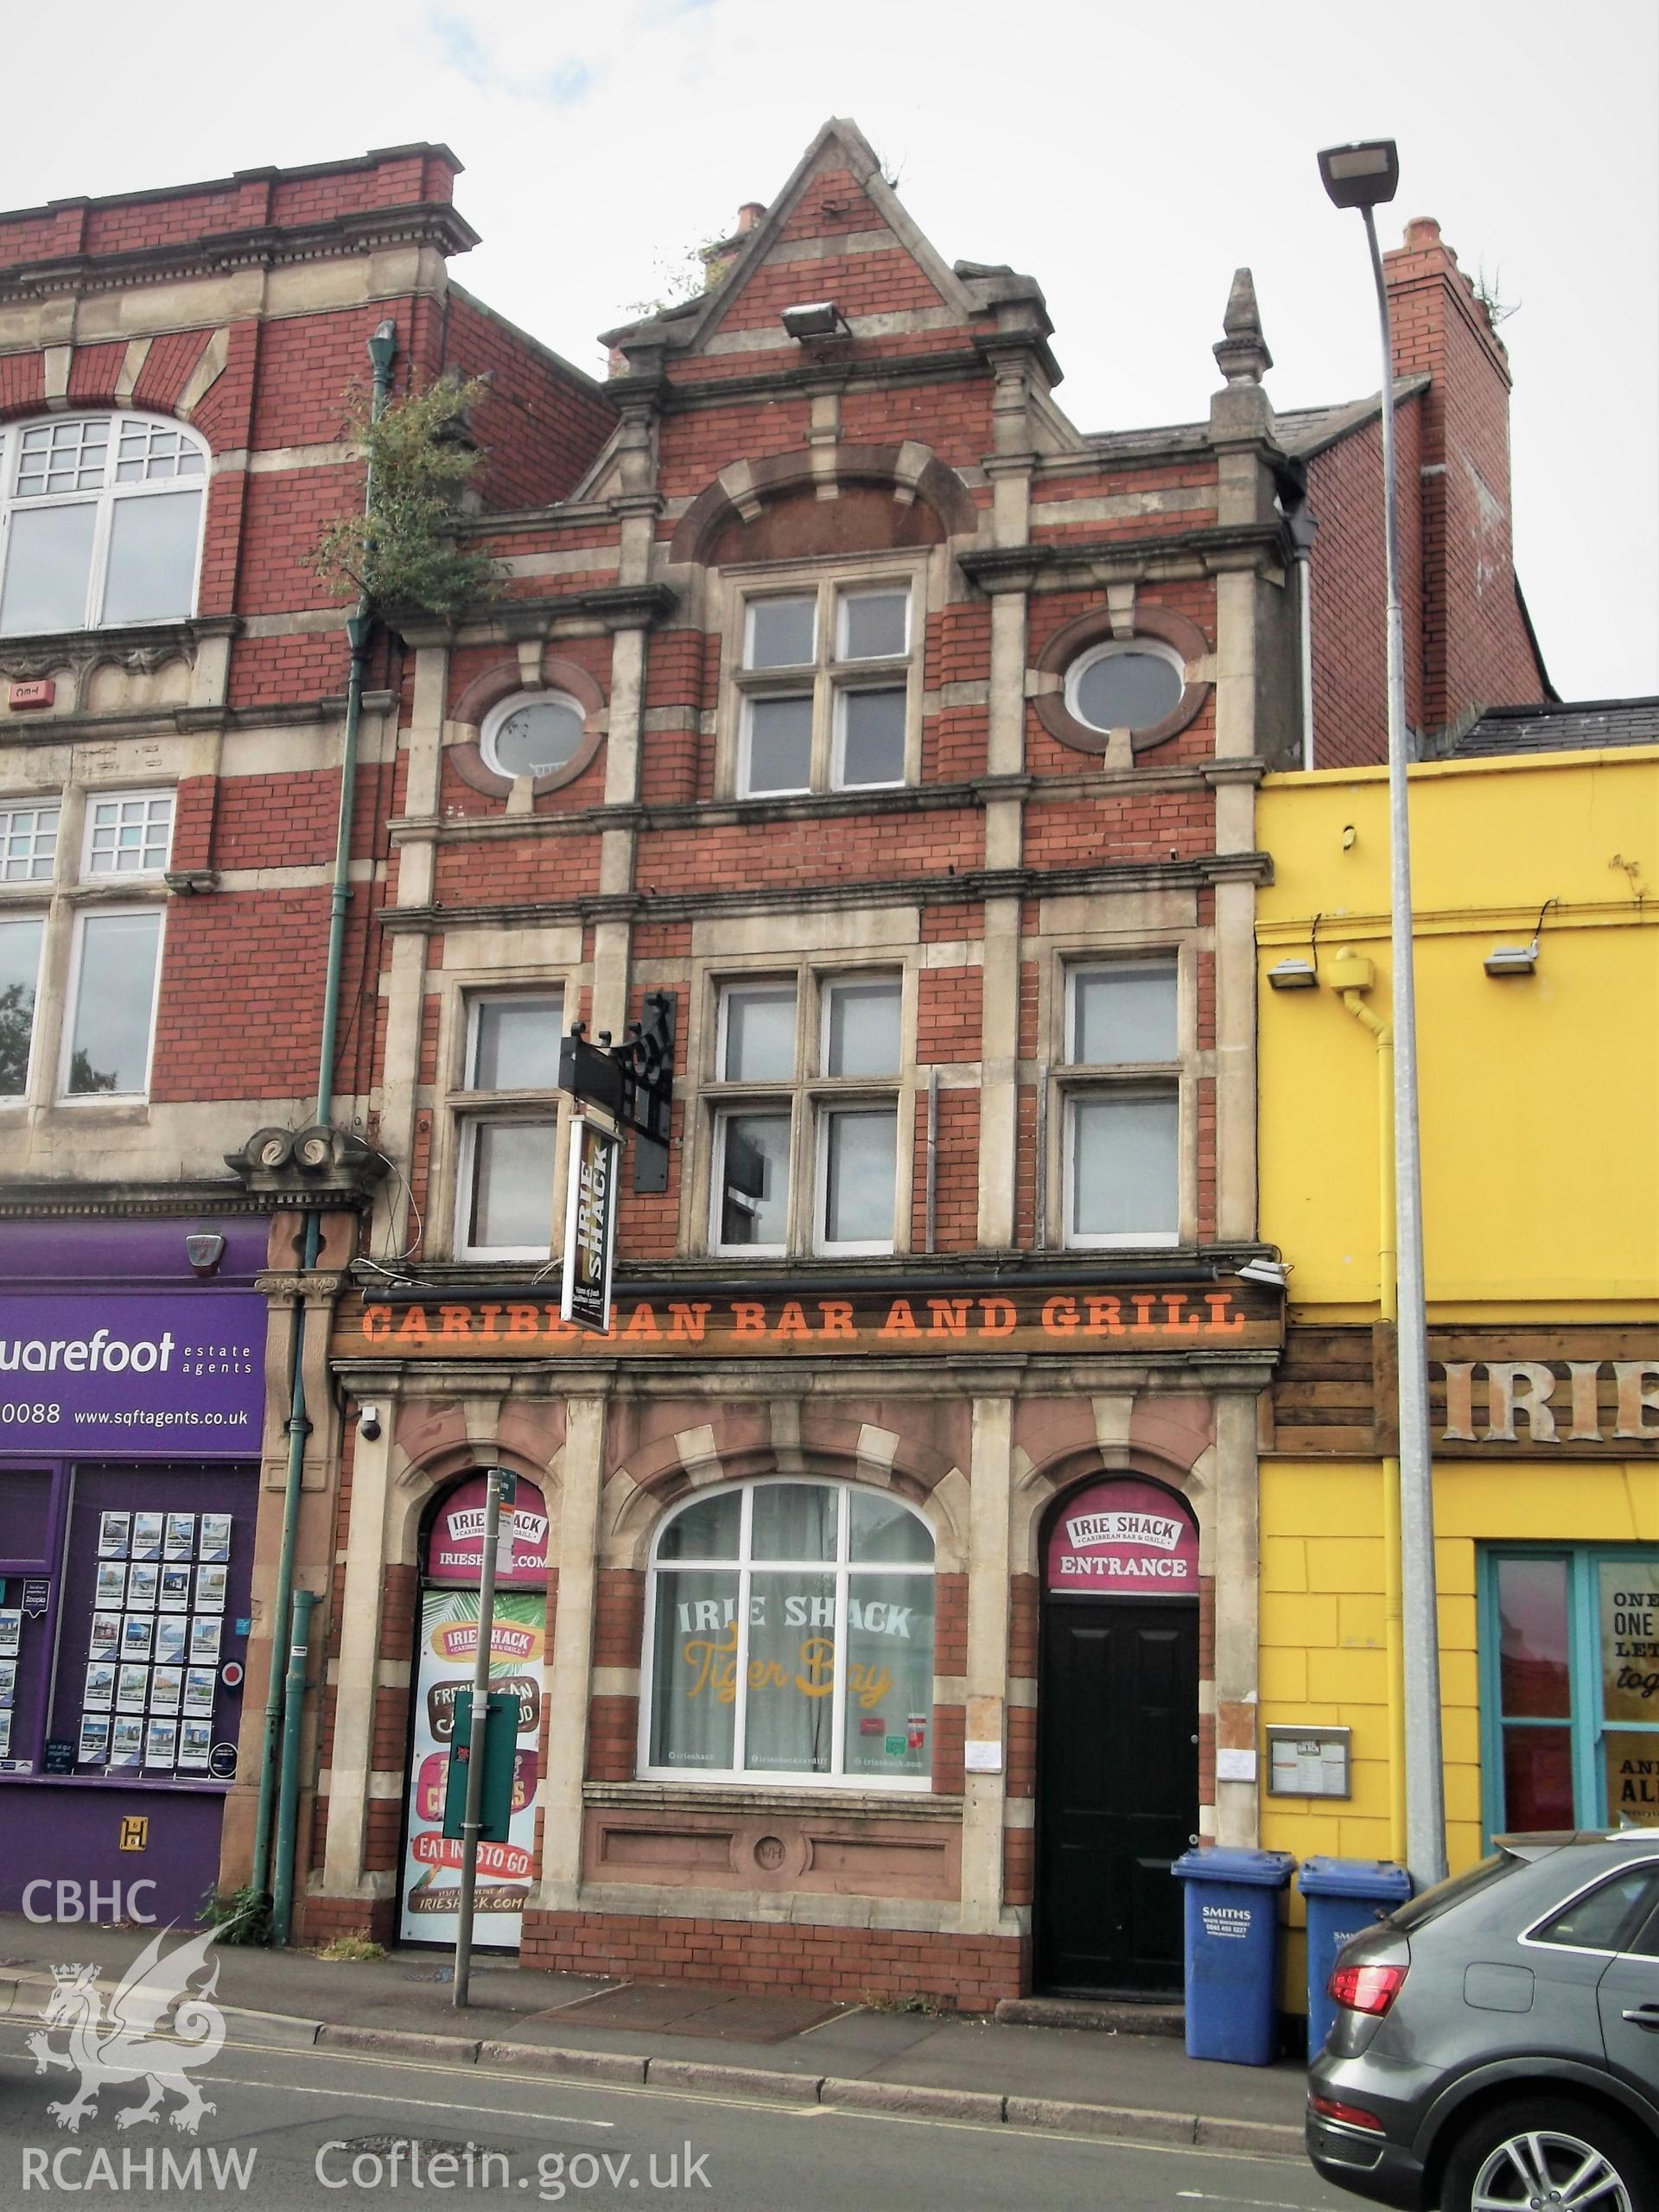 Colour photograph showing exterior of White Hart Inn at 66 James Street, Butetown, Cardiff. Photographed during survey conducted by Adam N. Coward on 17th July 2018.